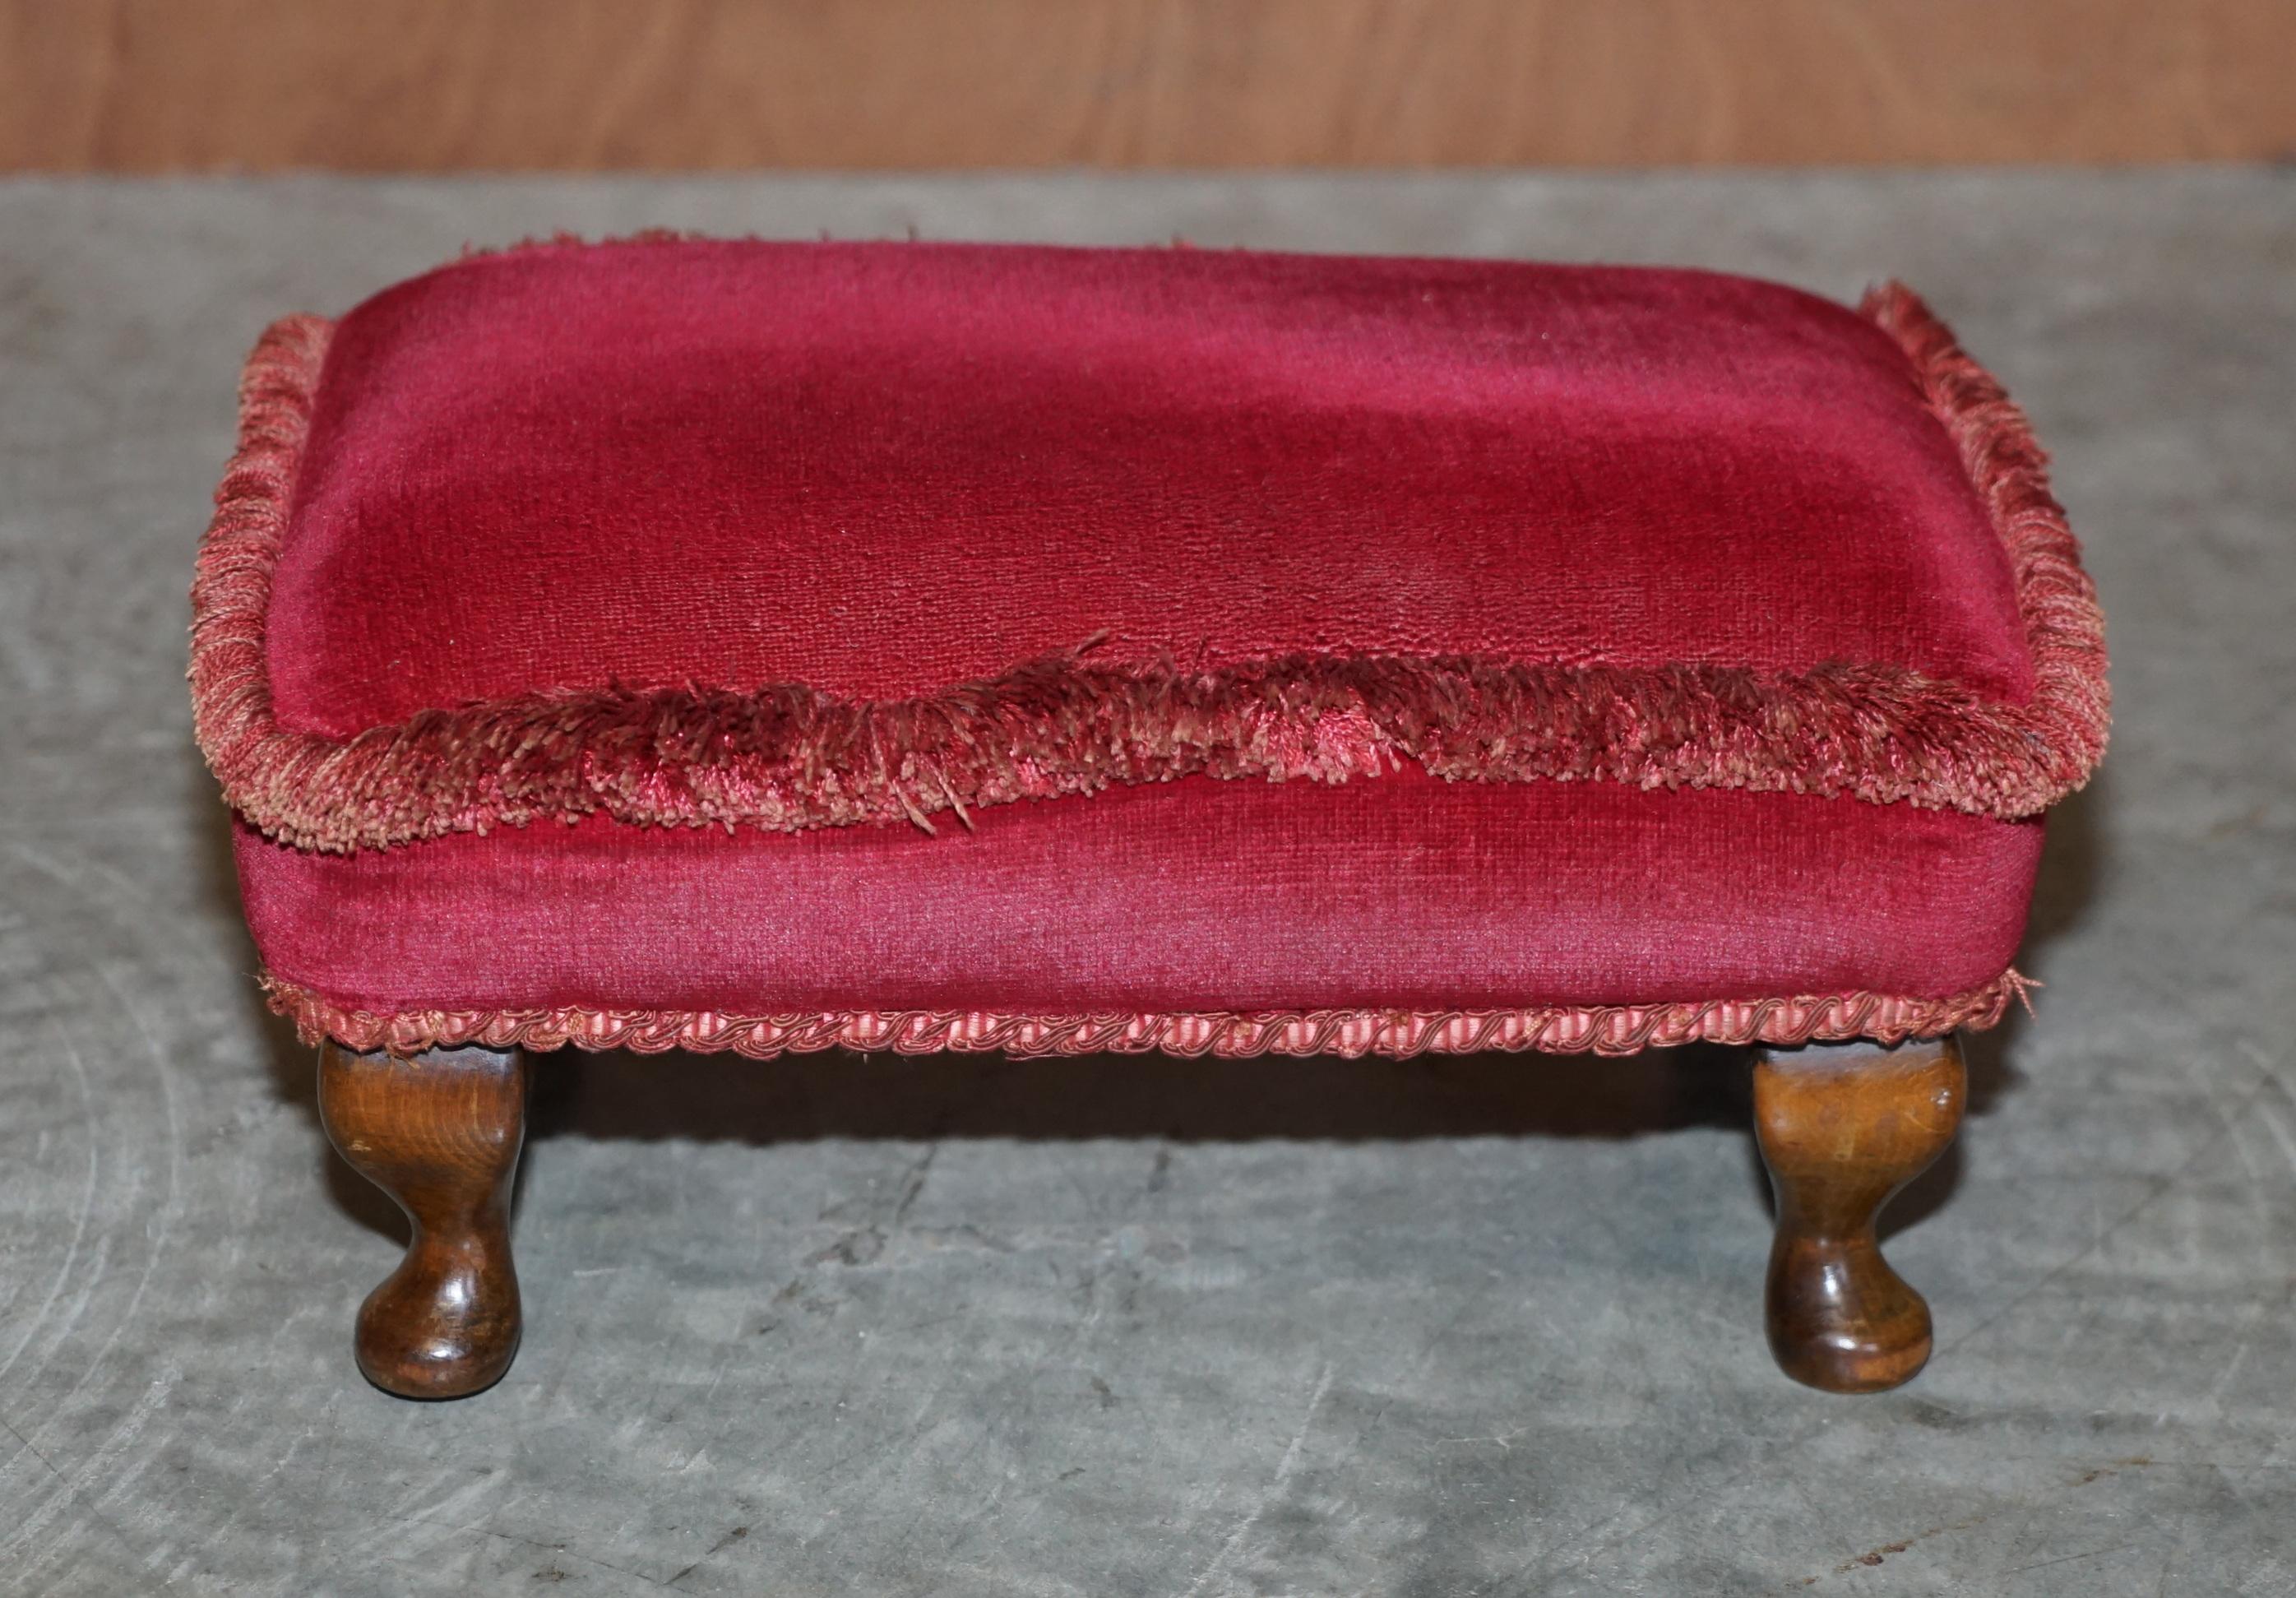 We are delighted to offer this very nice early Victorian footstool with lovely soft pink upholstery and cabriolet mahogany legs

A good looking and well made piece. These types of stools were designed to be used with wingback armchairs, the idea